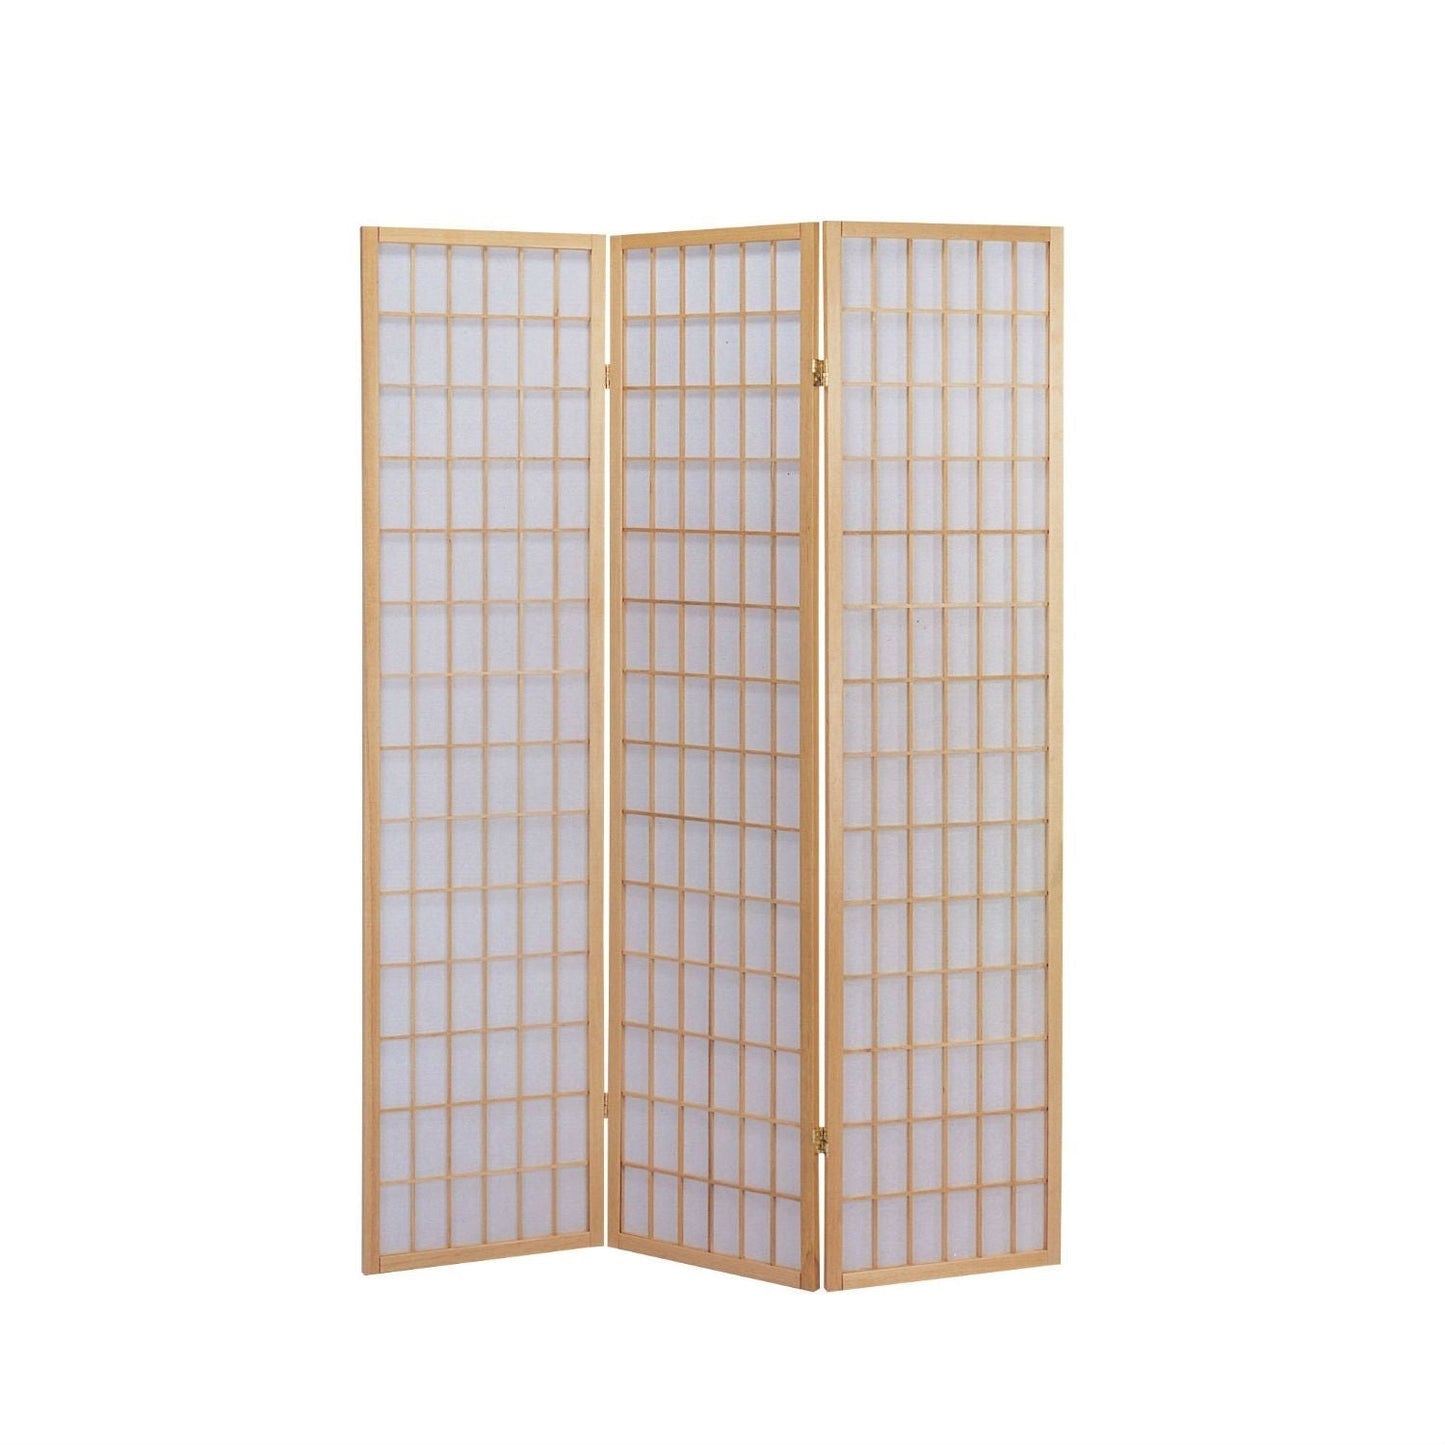 Accents > Room Divider Screens - 3-Panel Wooden Room Divider Japanese Shoji Screen In Natural